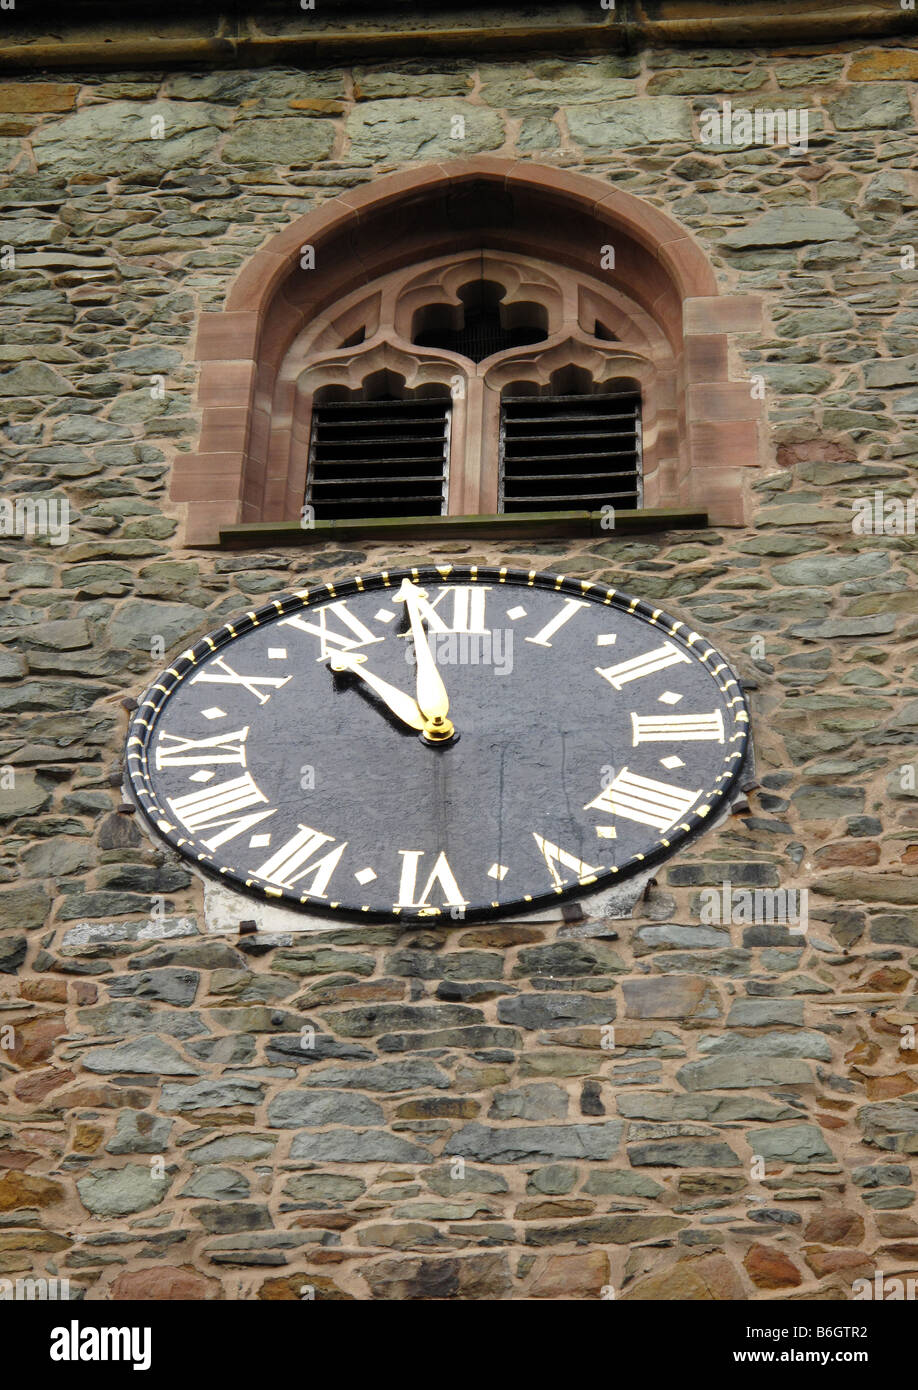 Metal clock face showing 10.59 with roman numerals on stone church clock tower with louvered stone mullion window above. Stock Photo